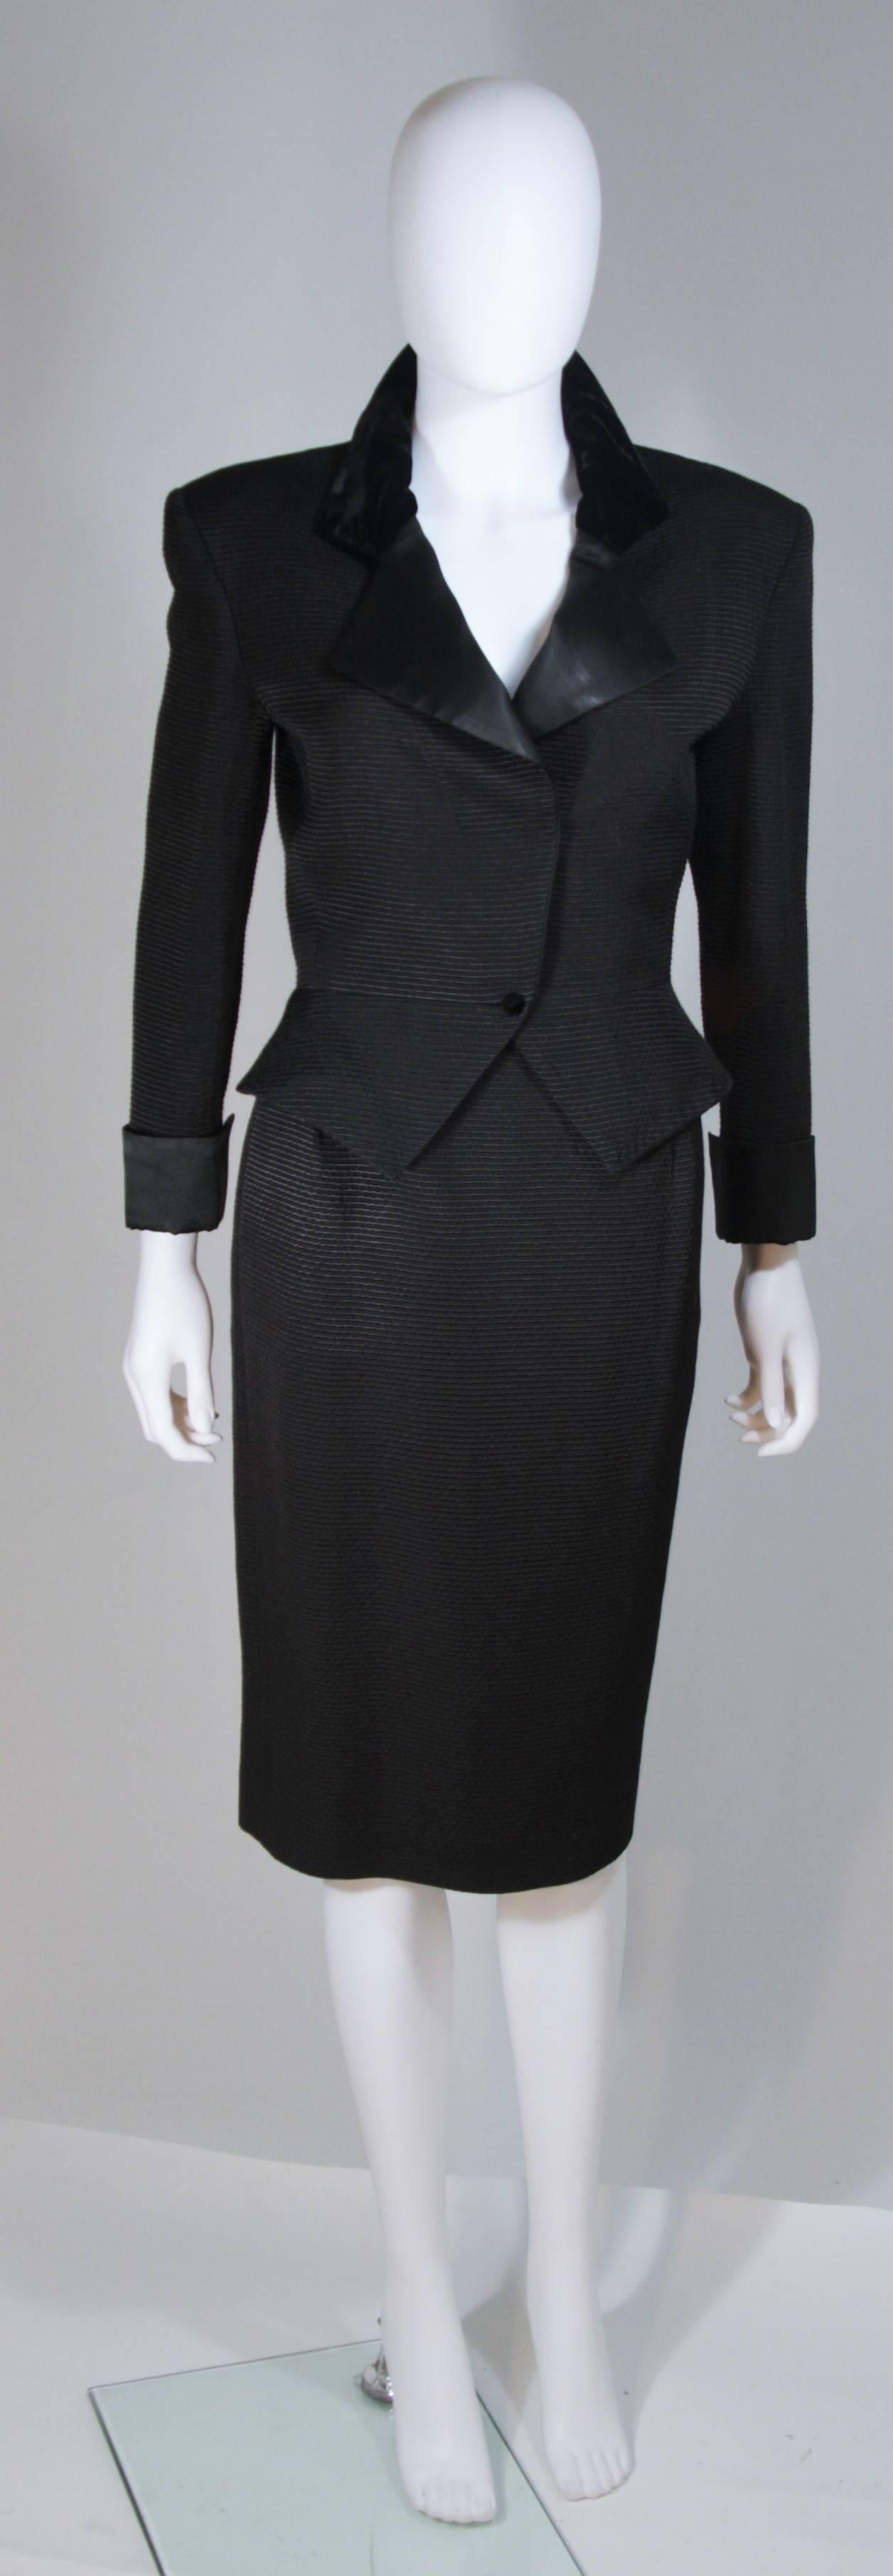  This Carven Couture skirt suit is composed of a black pin-tuck style fabric (cotton/viscose) with satin trim at the sleeves and velvet collar. The jacket features a peplum style with center front button closures. The skirt is a classic pencil style